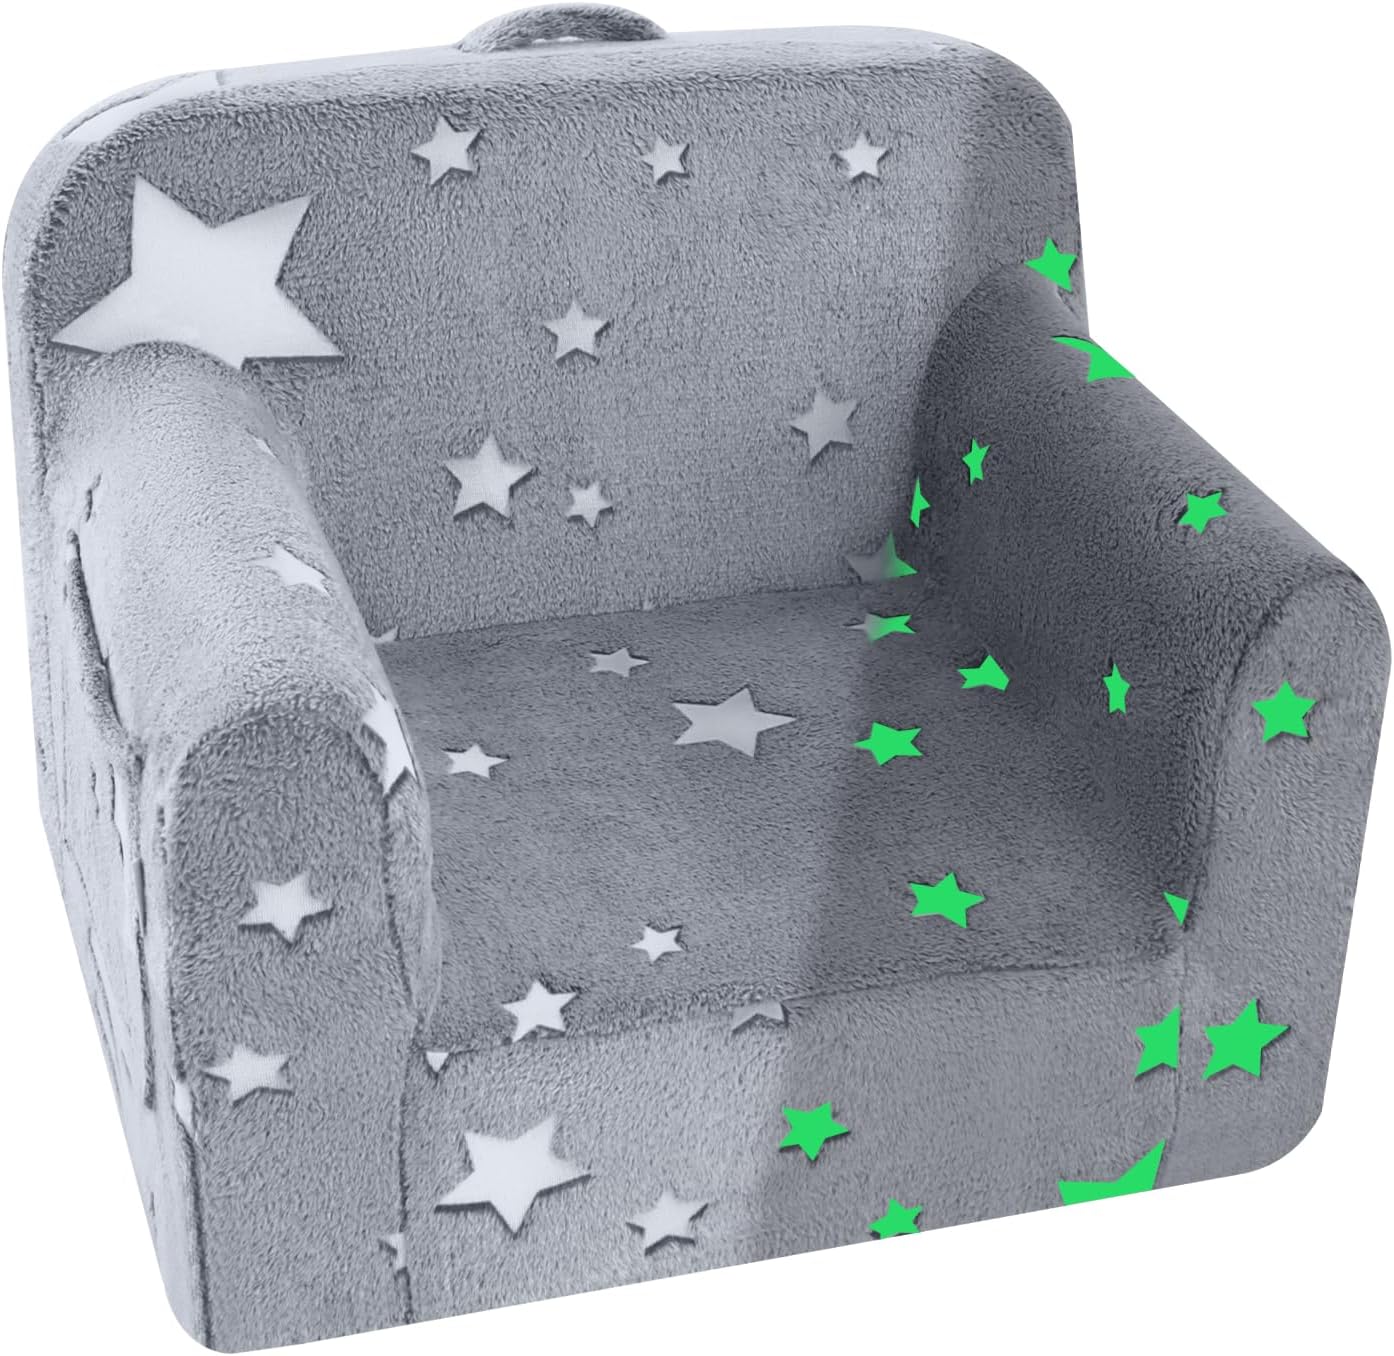 MeMoreCool Plush Toddler Chair Comfy Kids Armchair, Soft Foam Child Chair for Reading, Cozy Plush Chair for Toddlers 1-3, Glow Sofa Couch Kids Chair with Armrest, Star